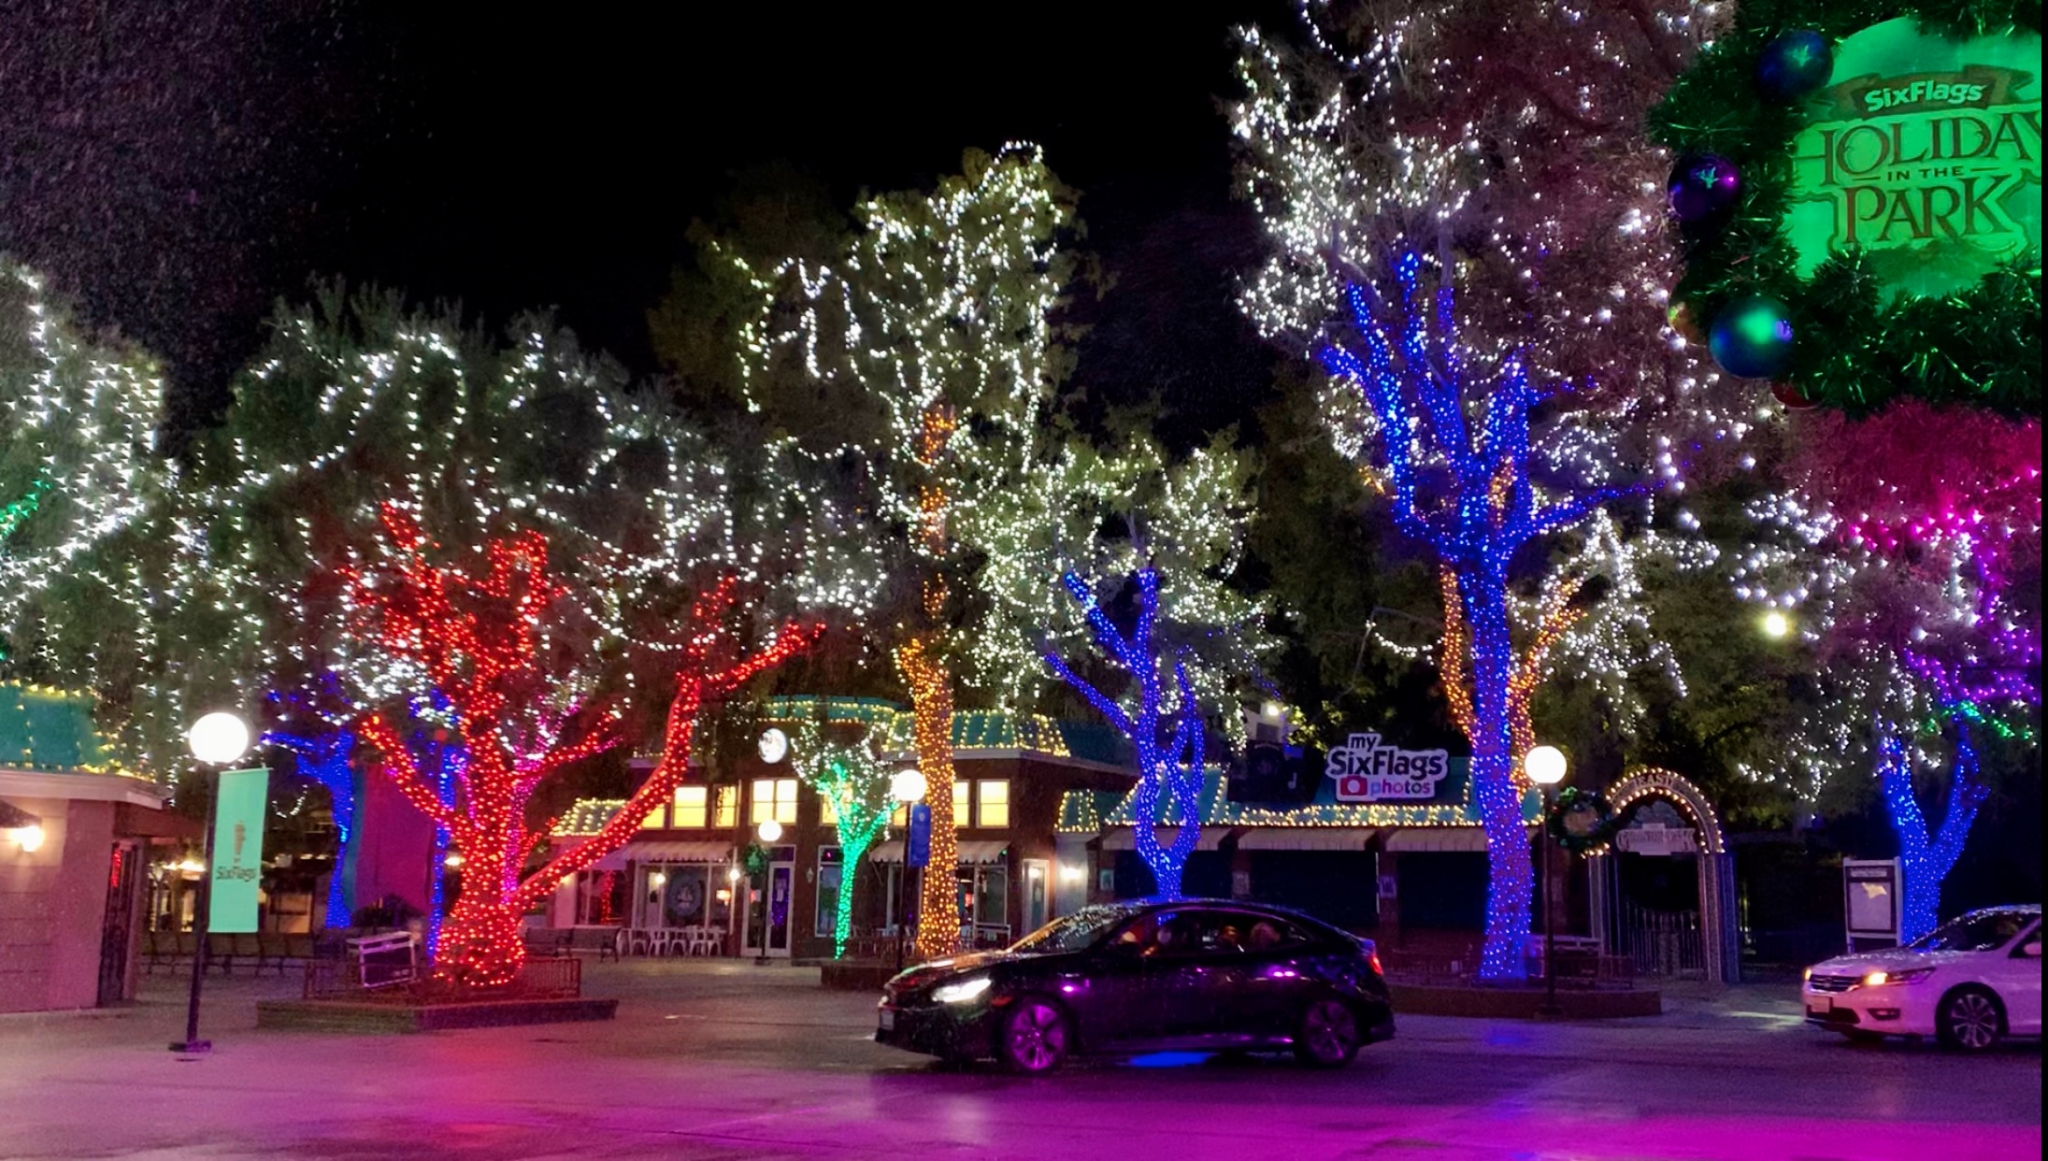 Six-Flags-Great-Adventure-drive-thru-Christmas-lights-car-in-the-park